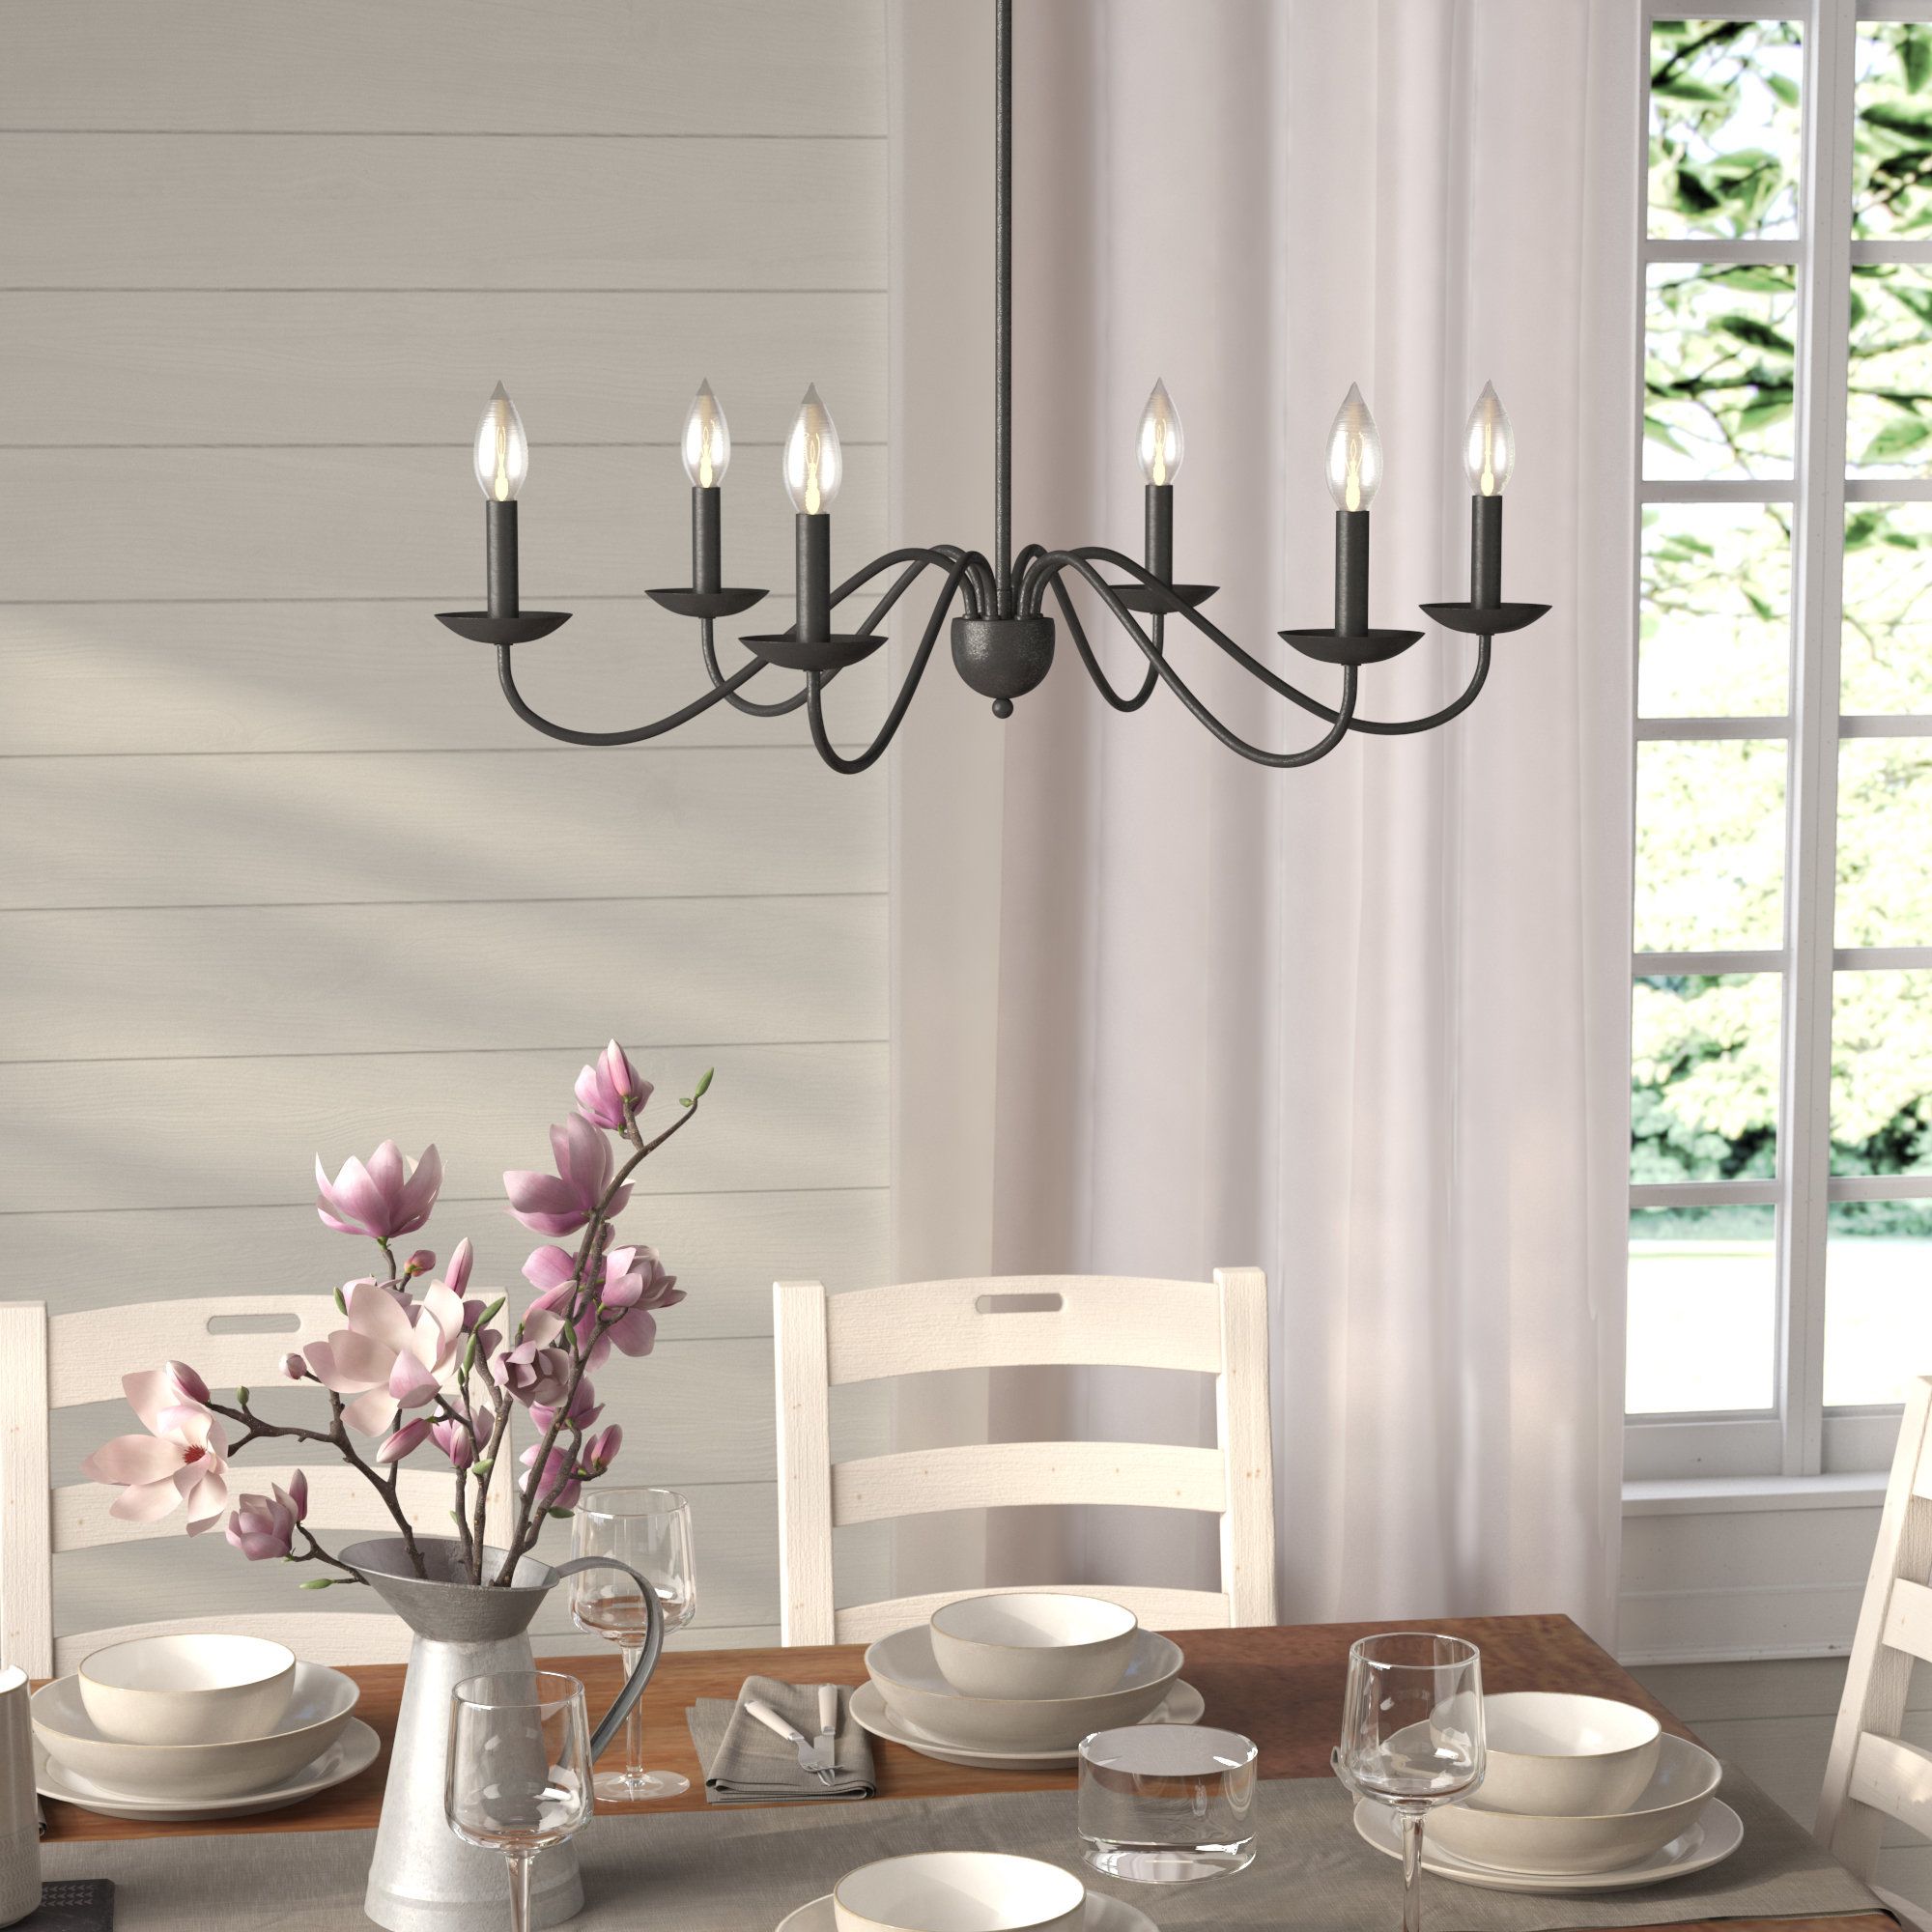 Perseus 6 Light Candle Style Chandelier With Regard To Perseus 6 Light Candle Style Chandeliers (View 2 of 30)